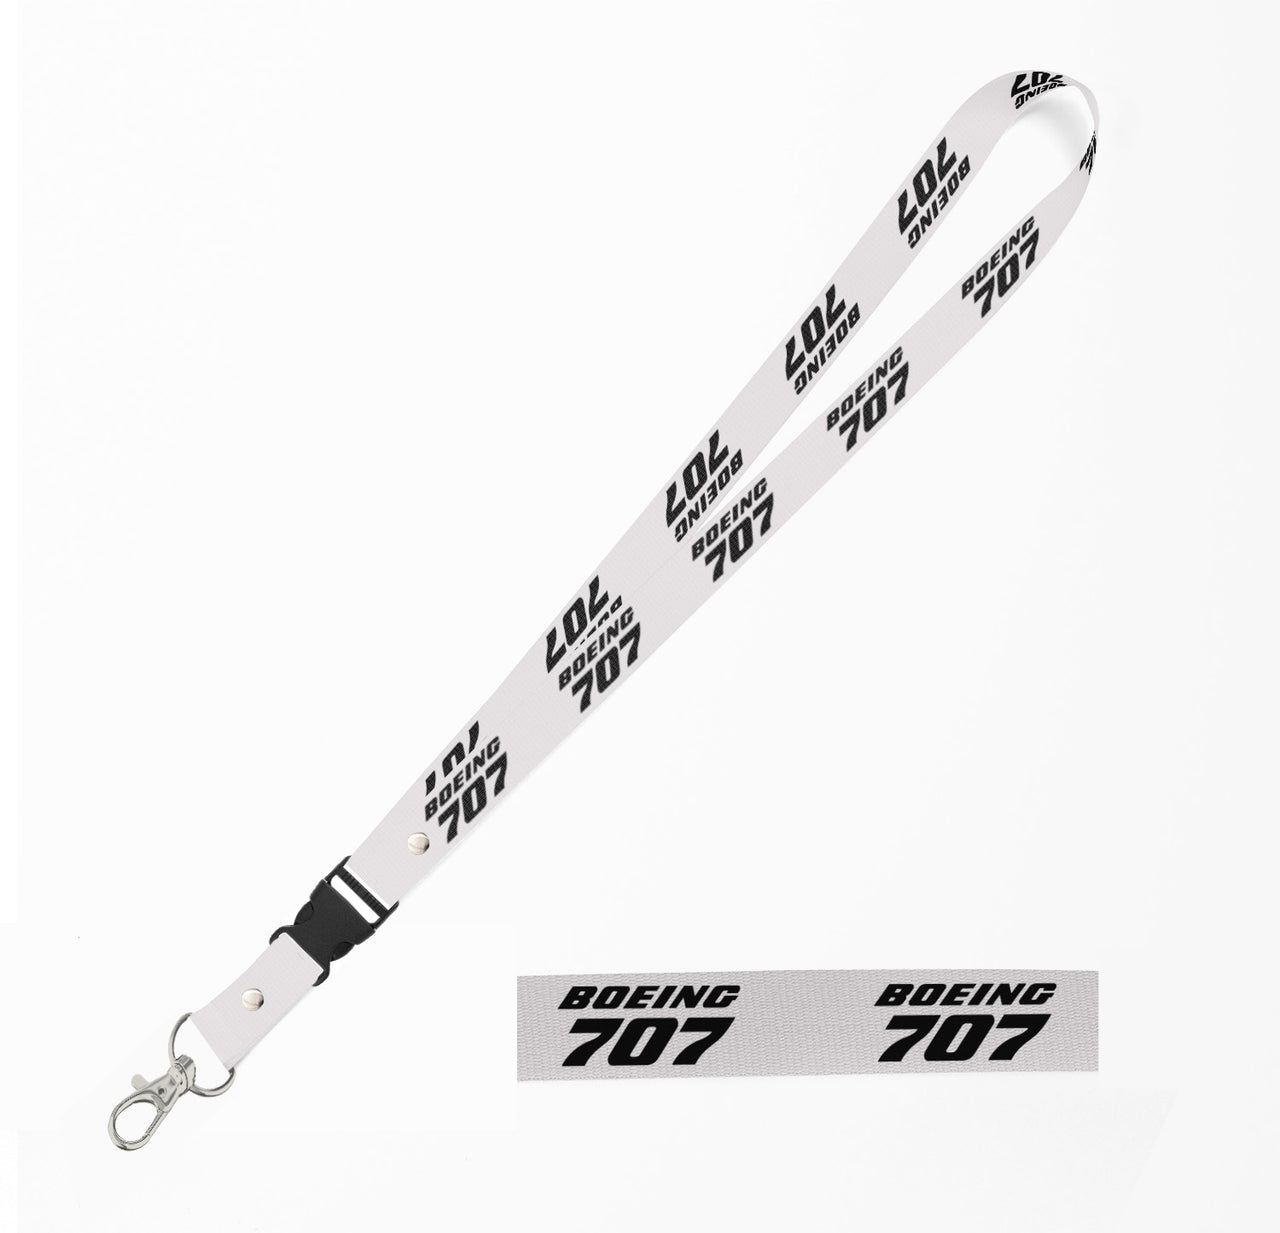 Boeing 707 & Text Designed Detachable Lanyard & ID Holders